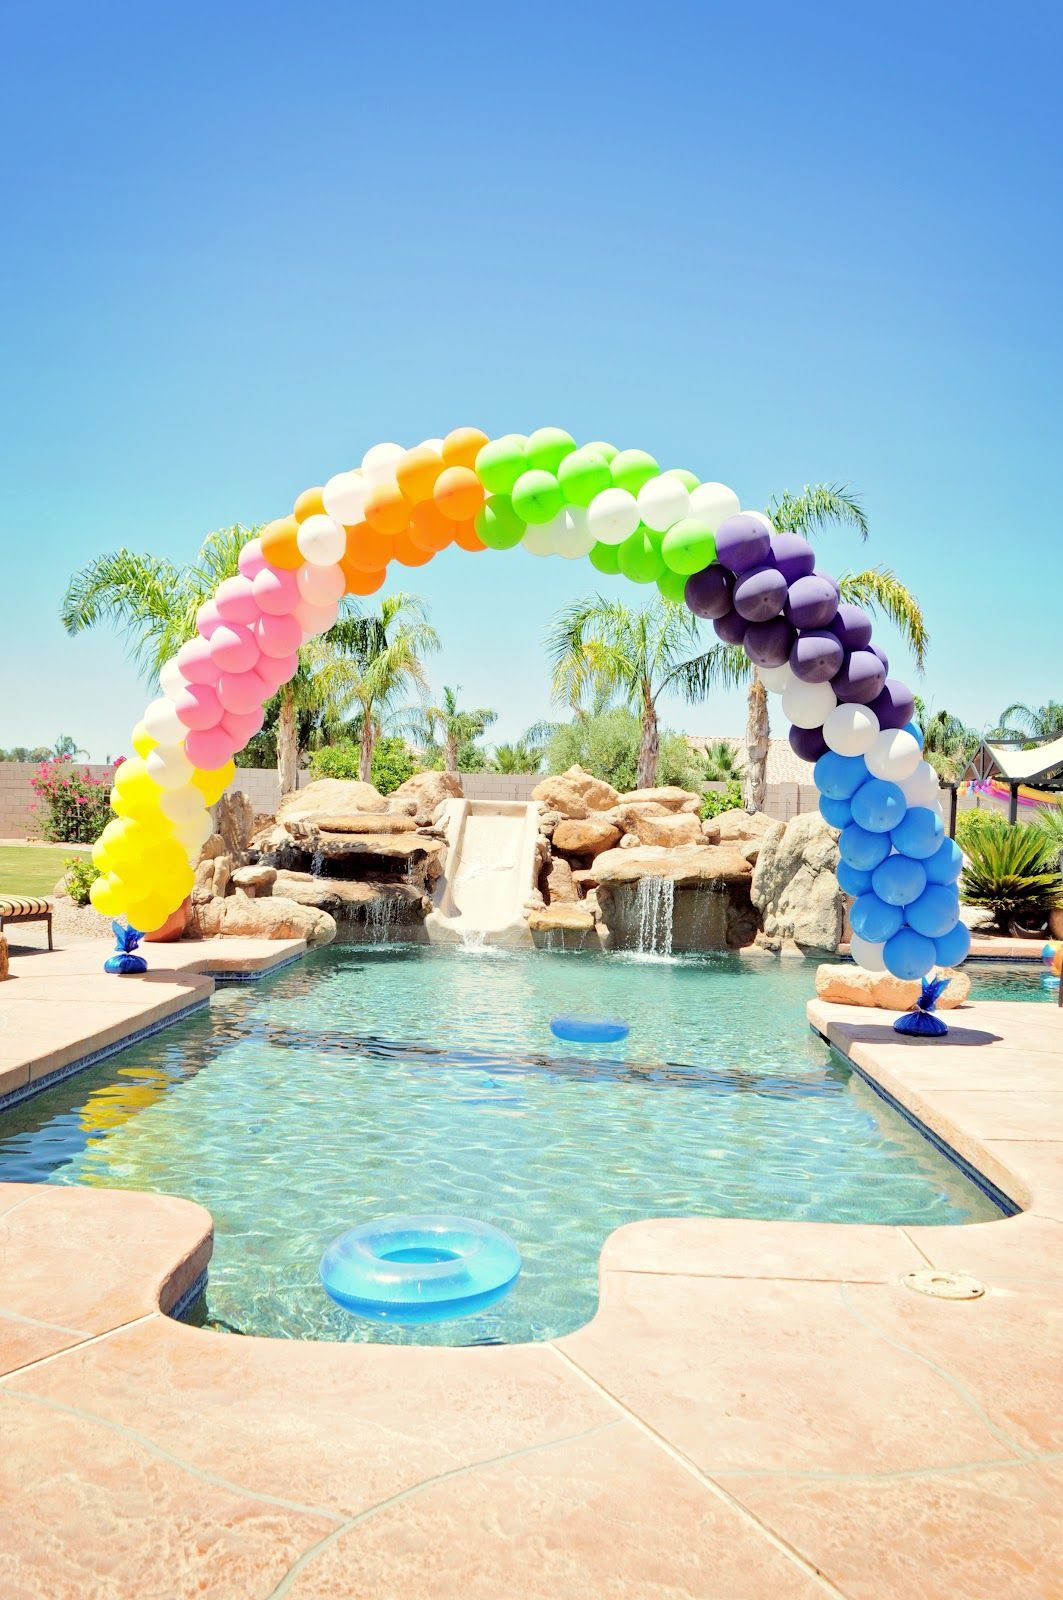 My Little Pony Pool Party Ideas
 My Little Pony Birthday Party